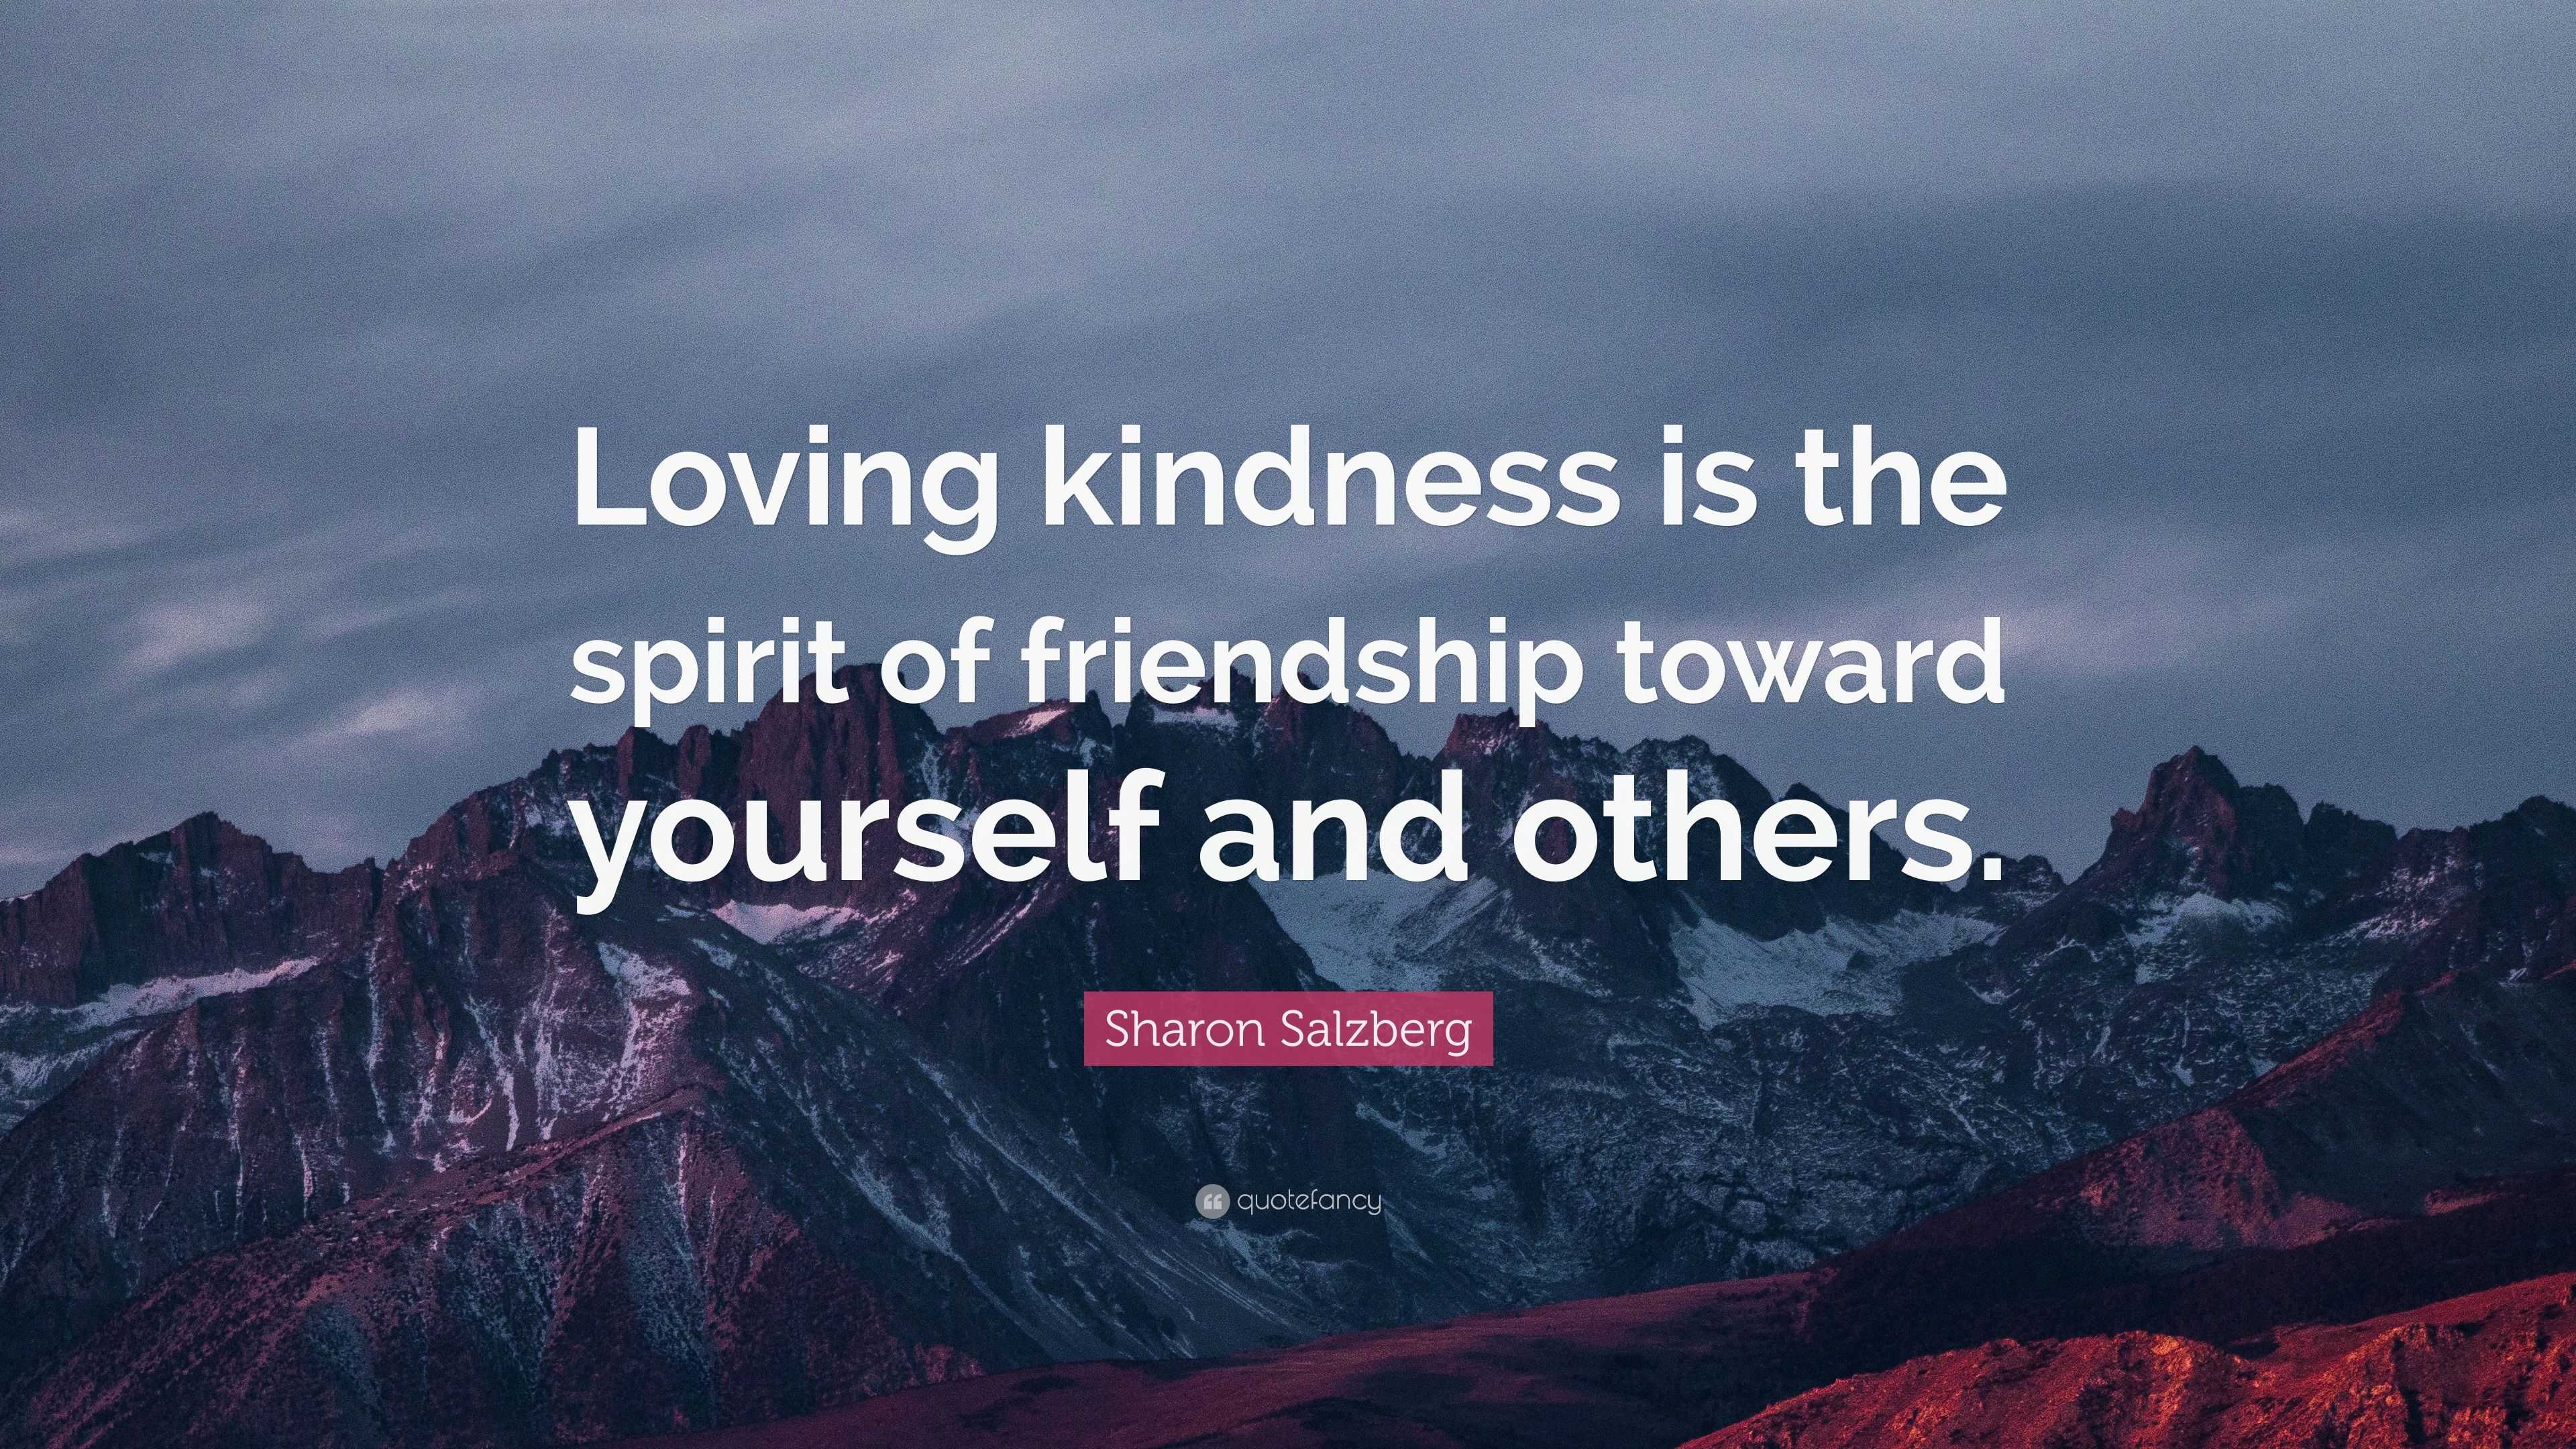 Sharon Salzberg Quote “loving Kindness Is The Spirit Of Friendship Toward Yourself And Others”